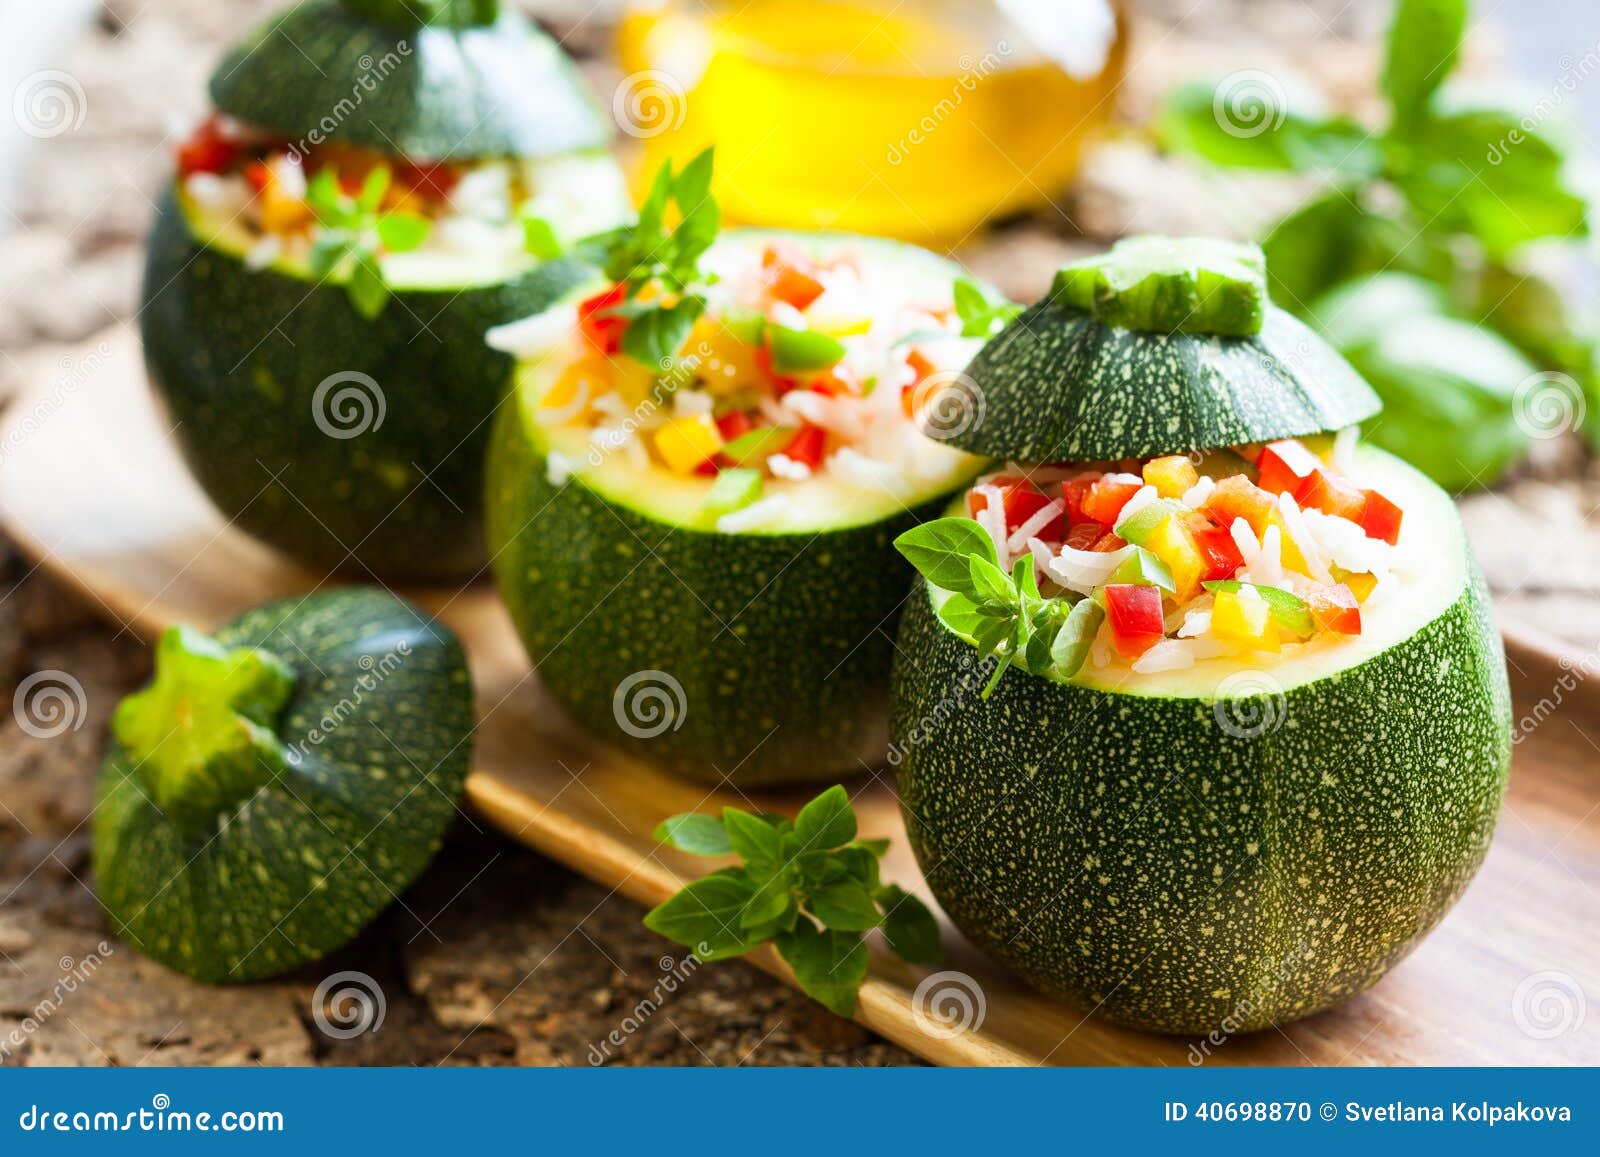 zucchini stuffed with vegetables